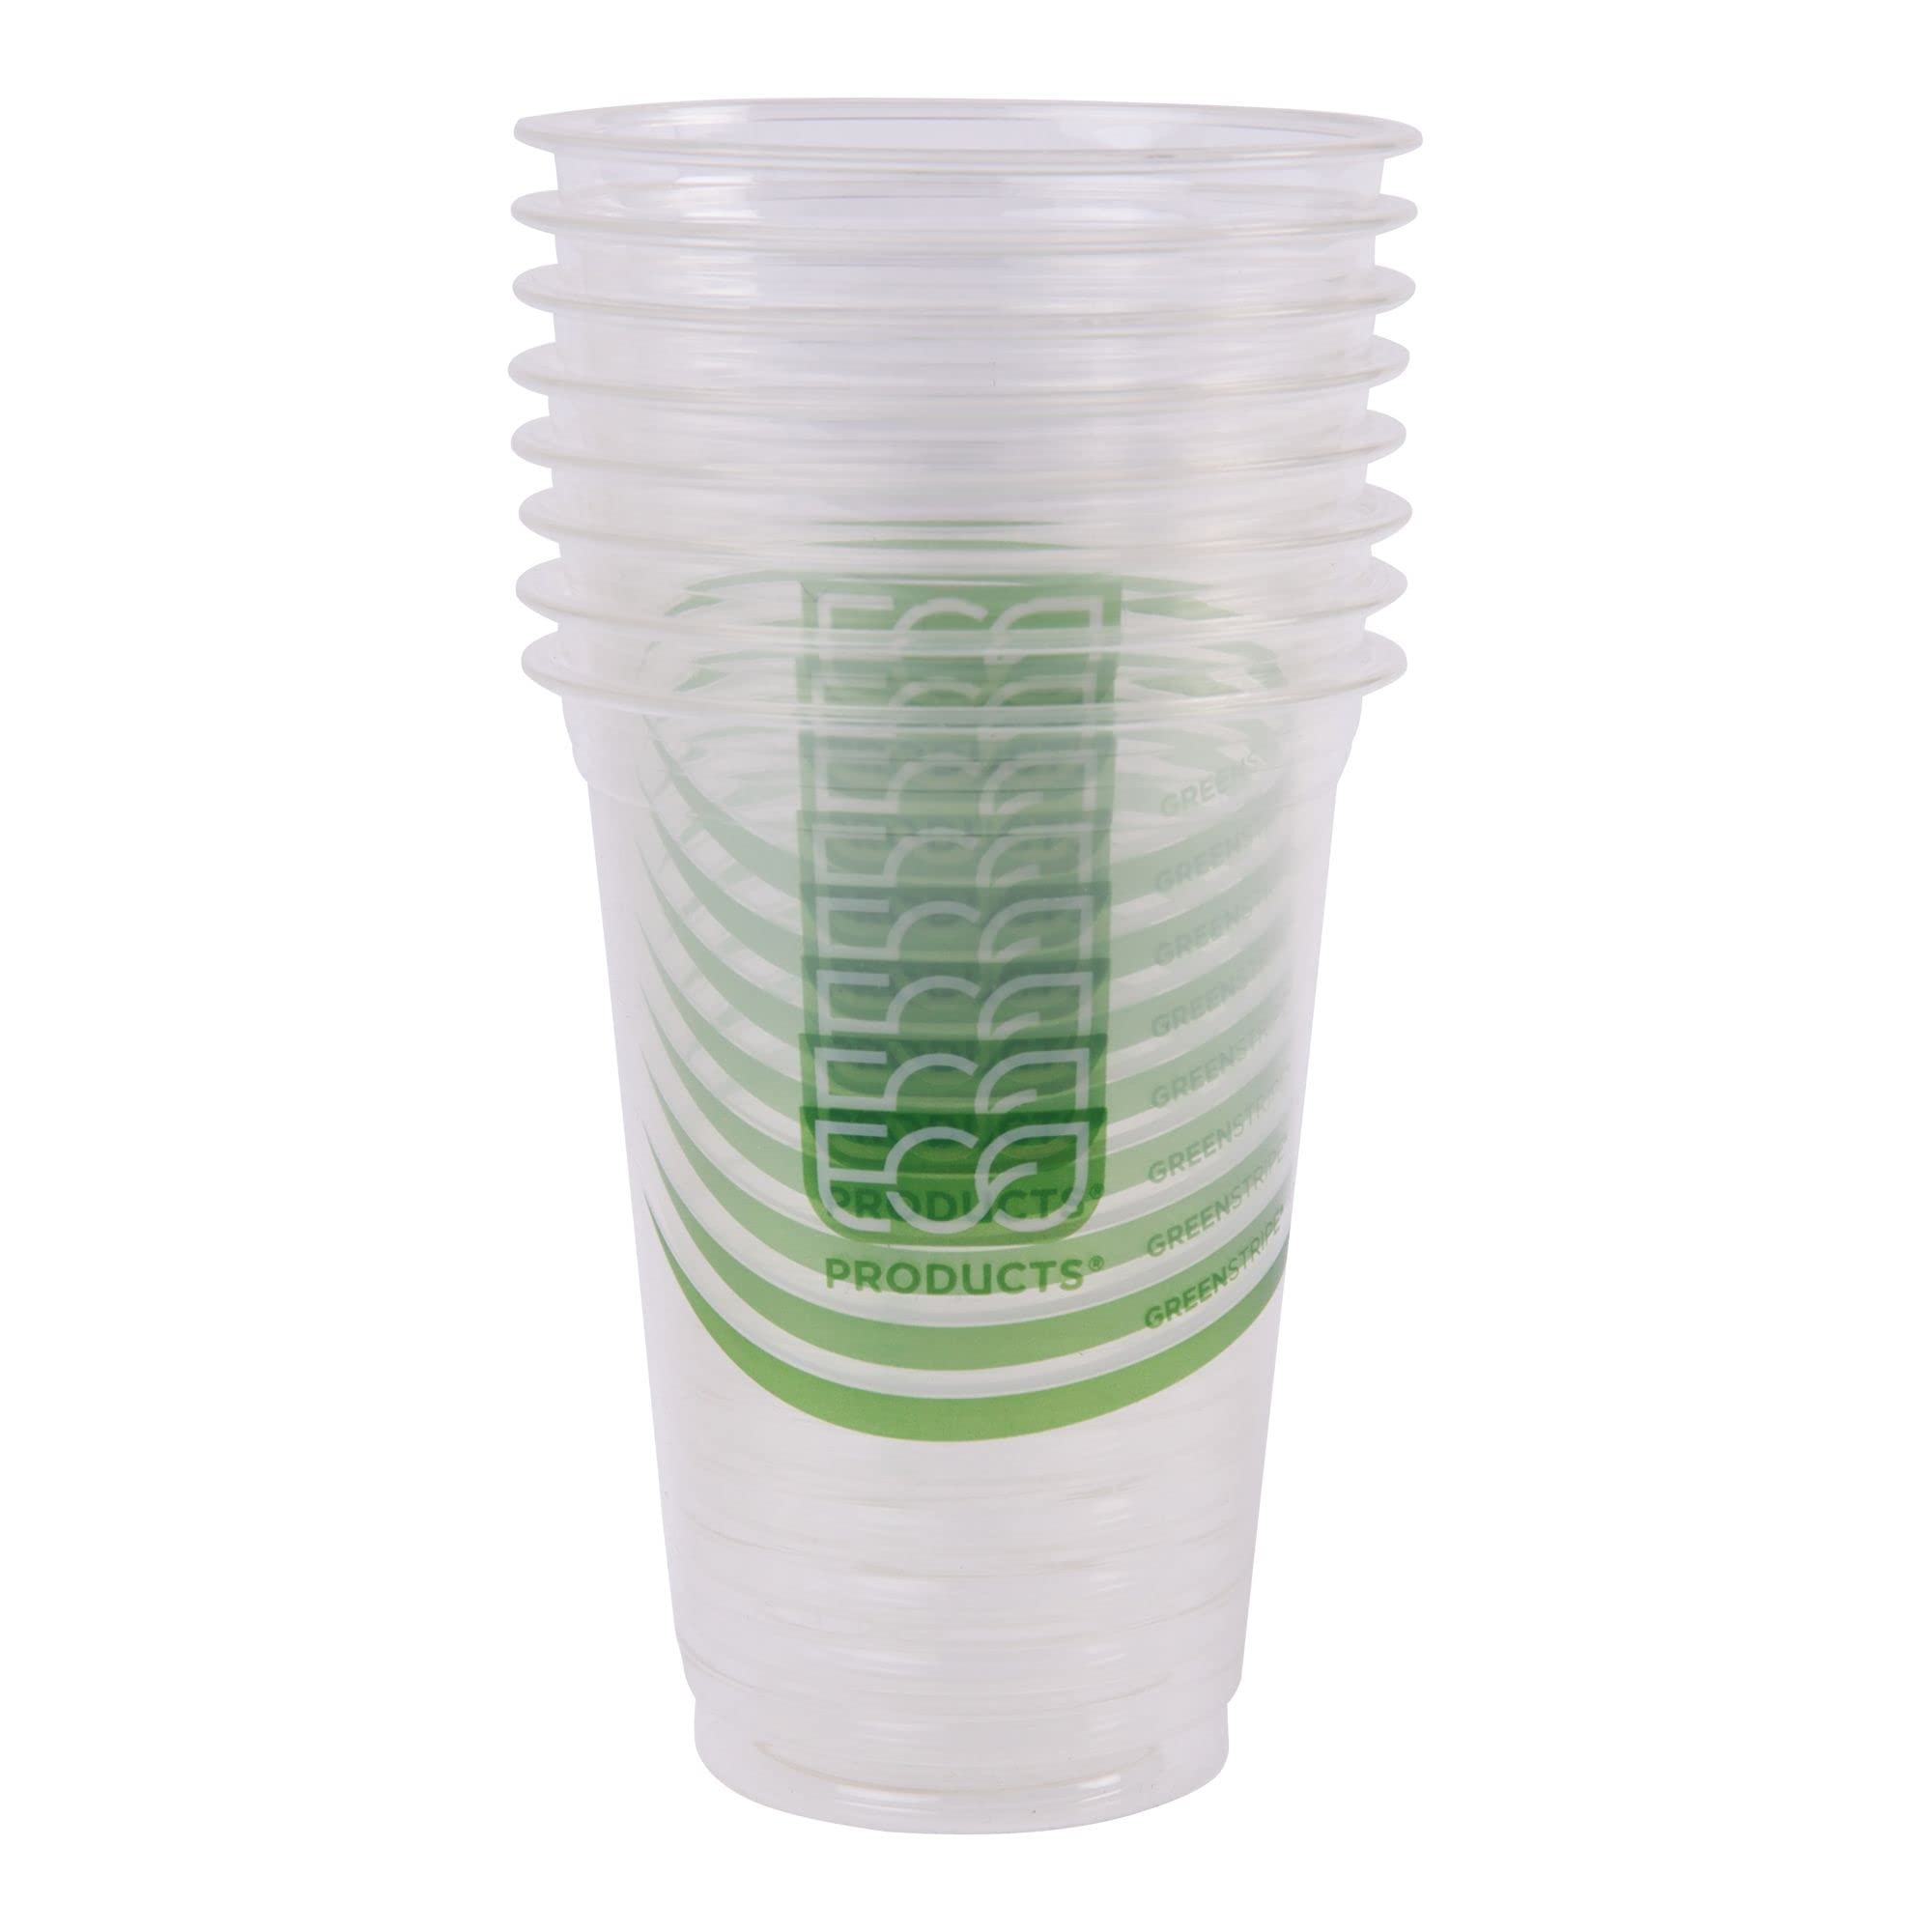 Eco-Products GreenStripe Renewable & Compostable Cold Cups, 16 oz, Case of 1000 (EP-CC16-GS)